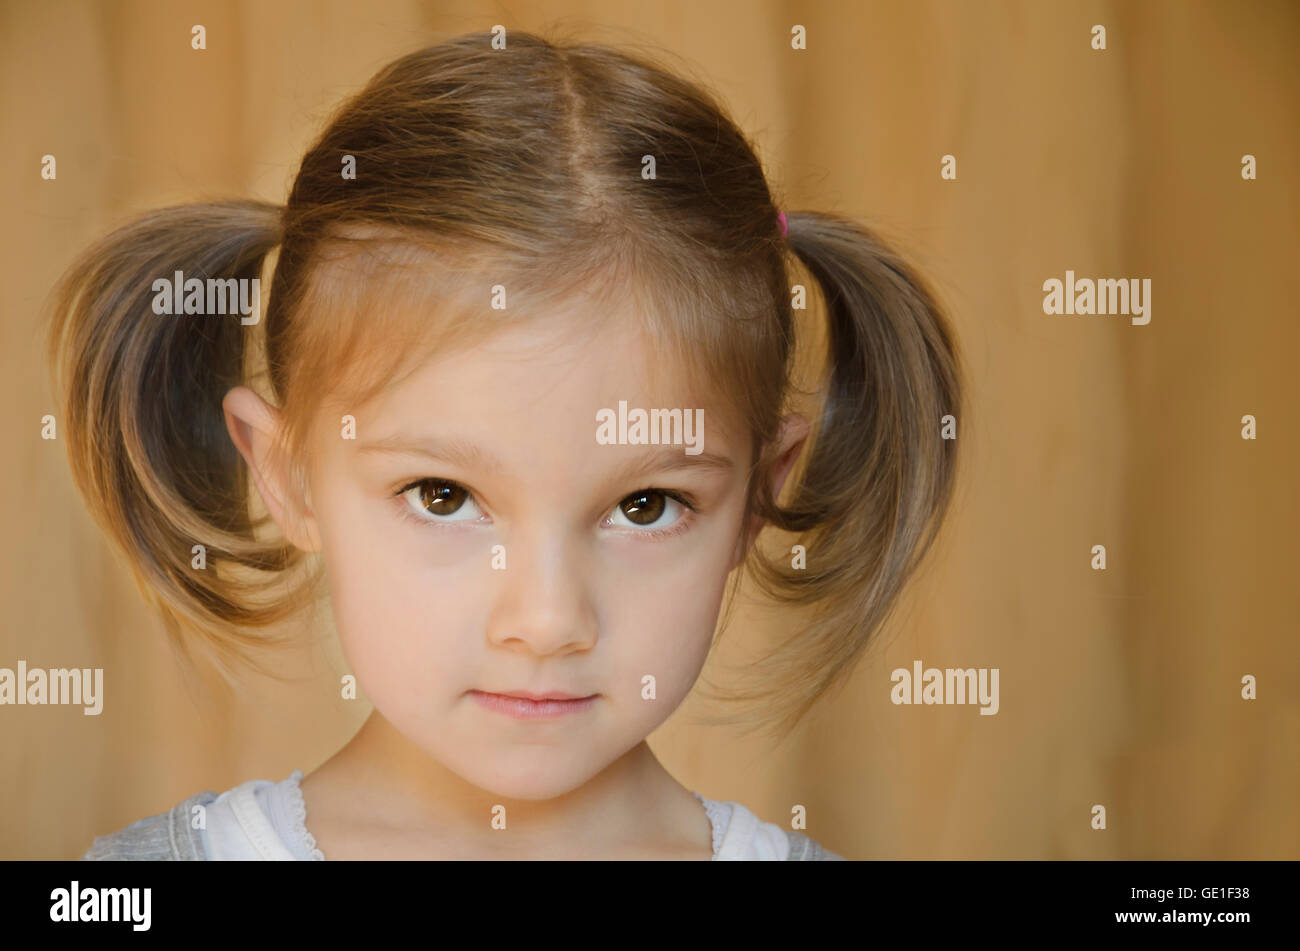 Portrait of a girl with pigtails Stock Photo